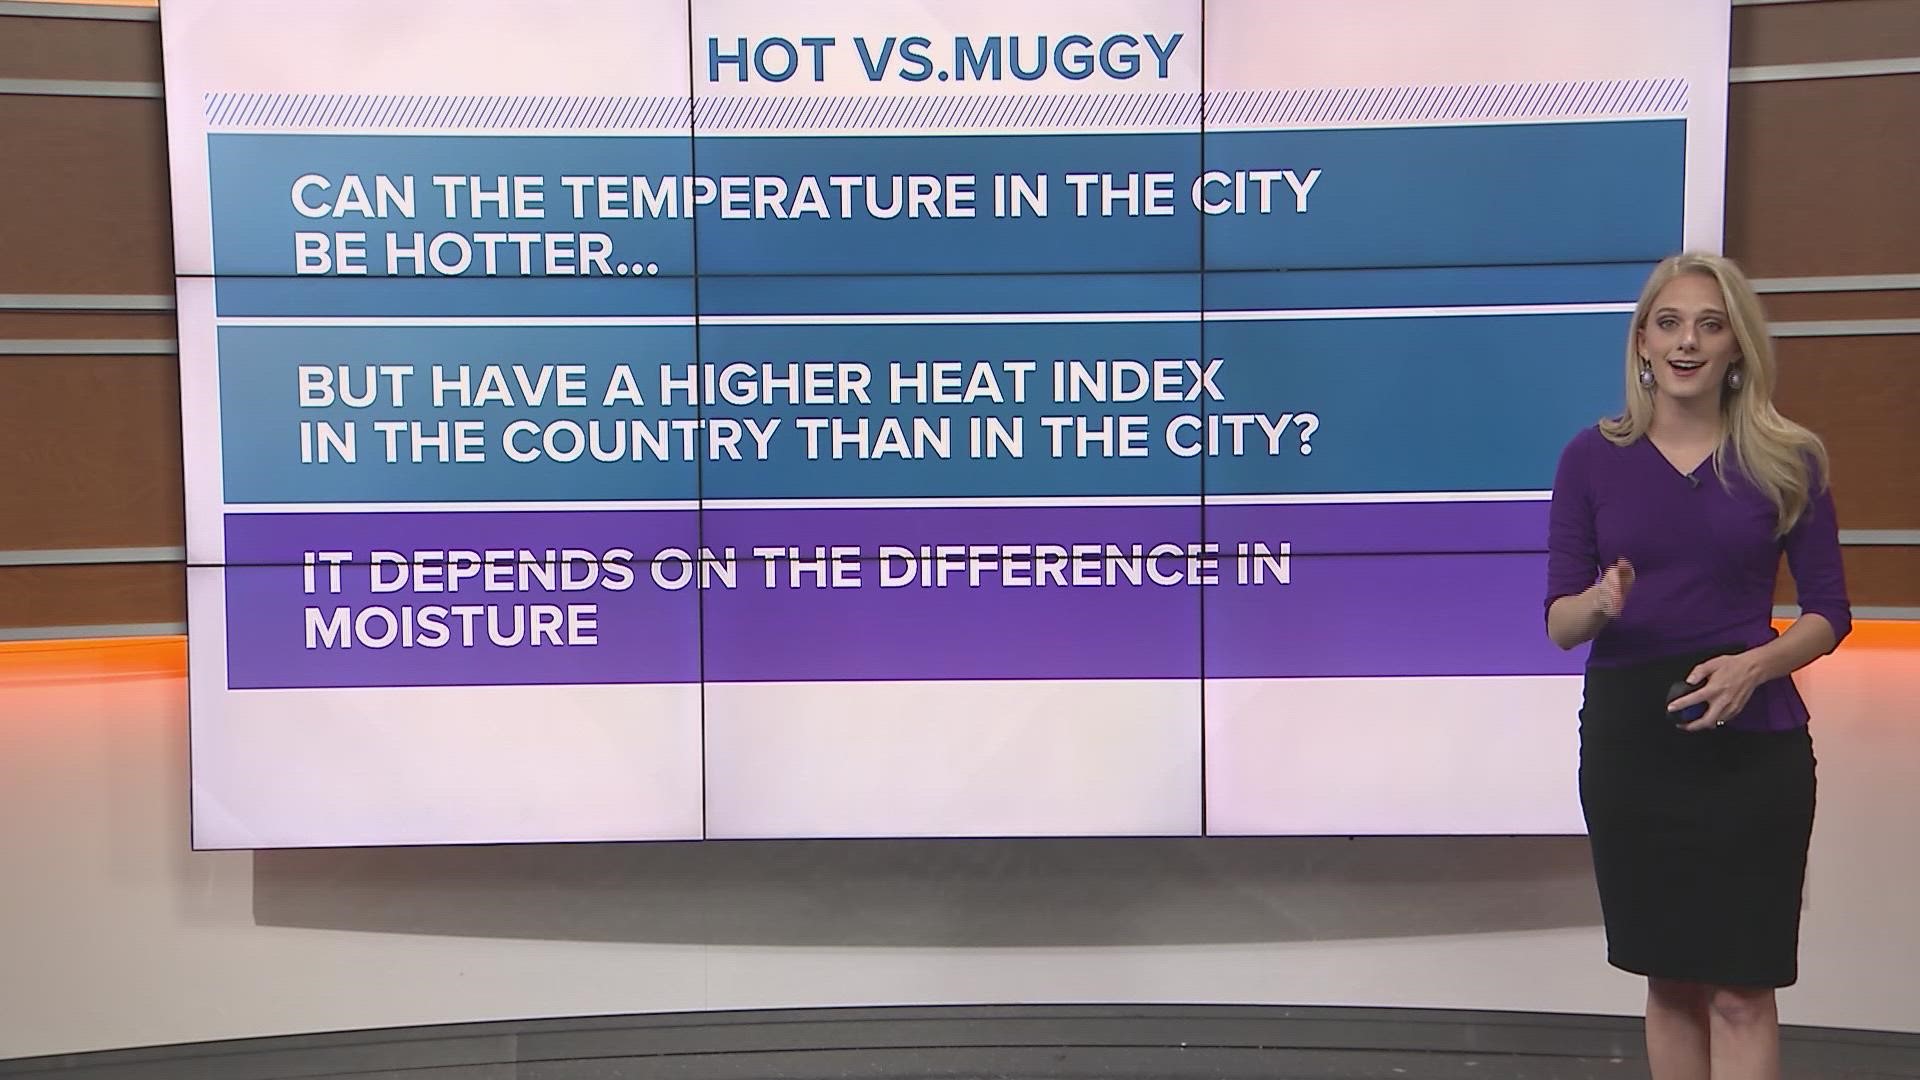 The air temperature can be hotter in the city, while it feels warmer in the country.